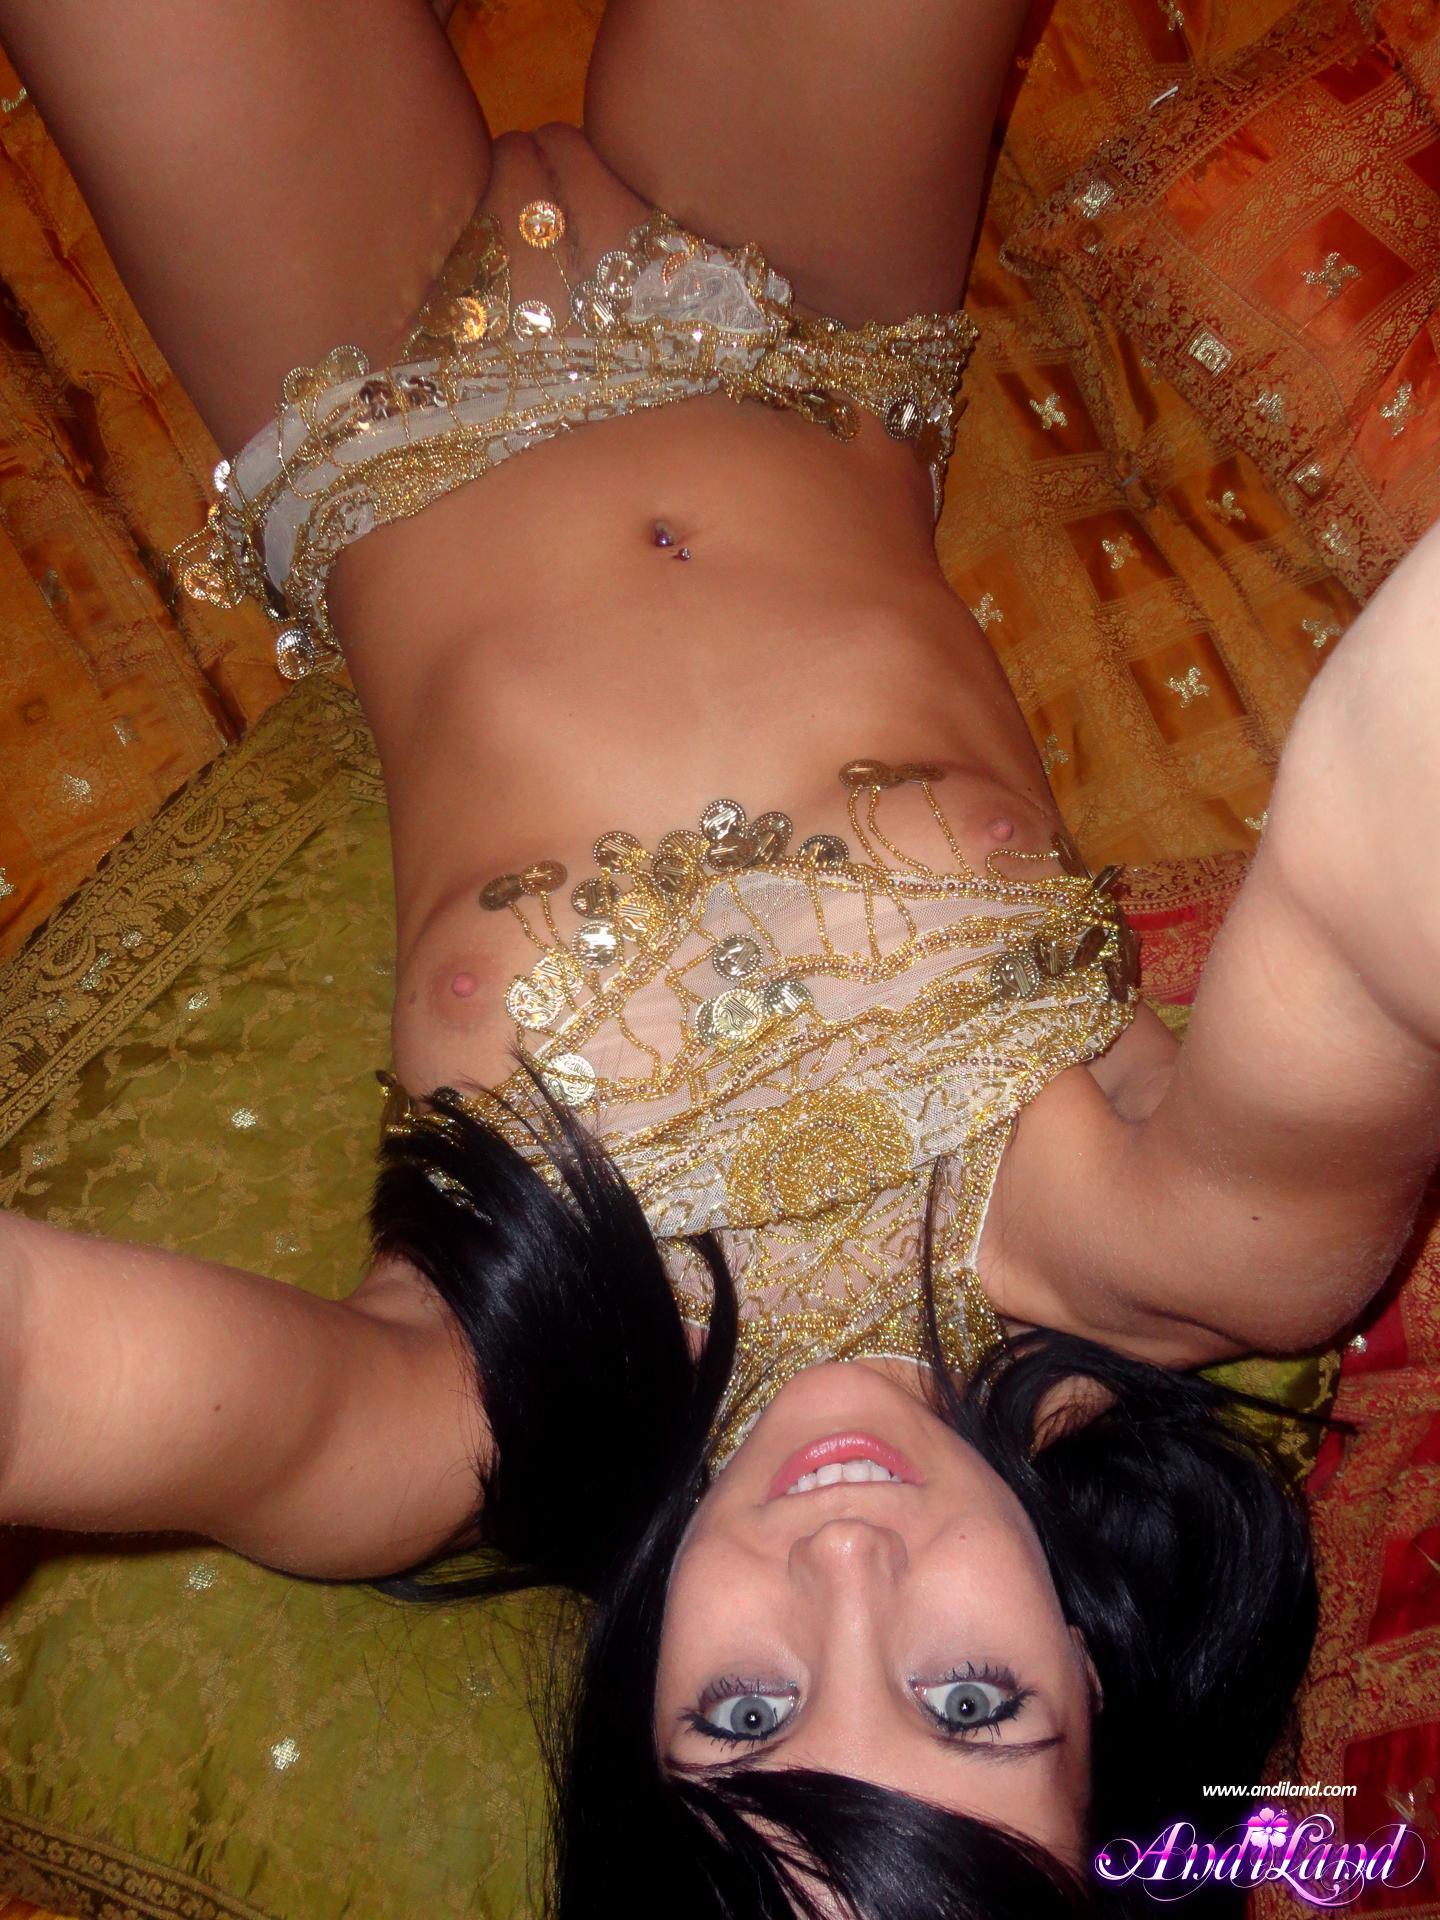 Pictures of Andi ready to have some fun in a hot belly dancer outfit #53141391